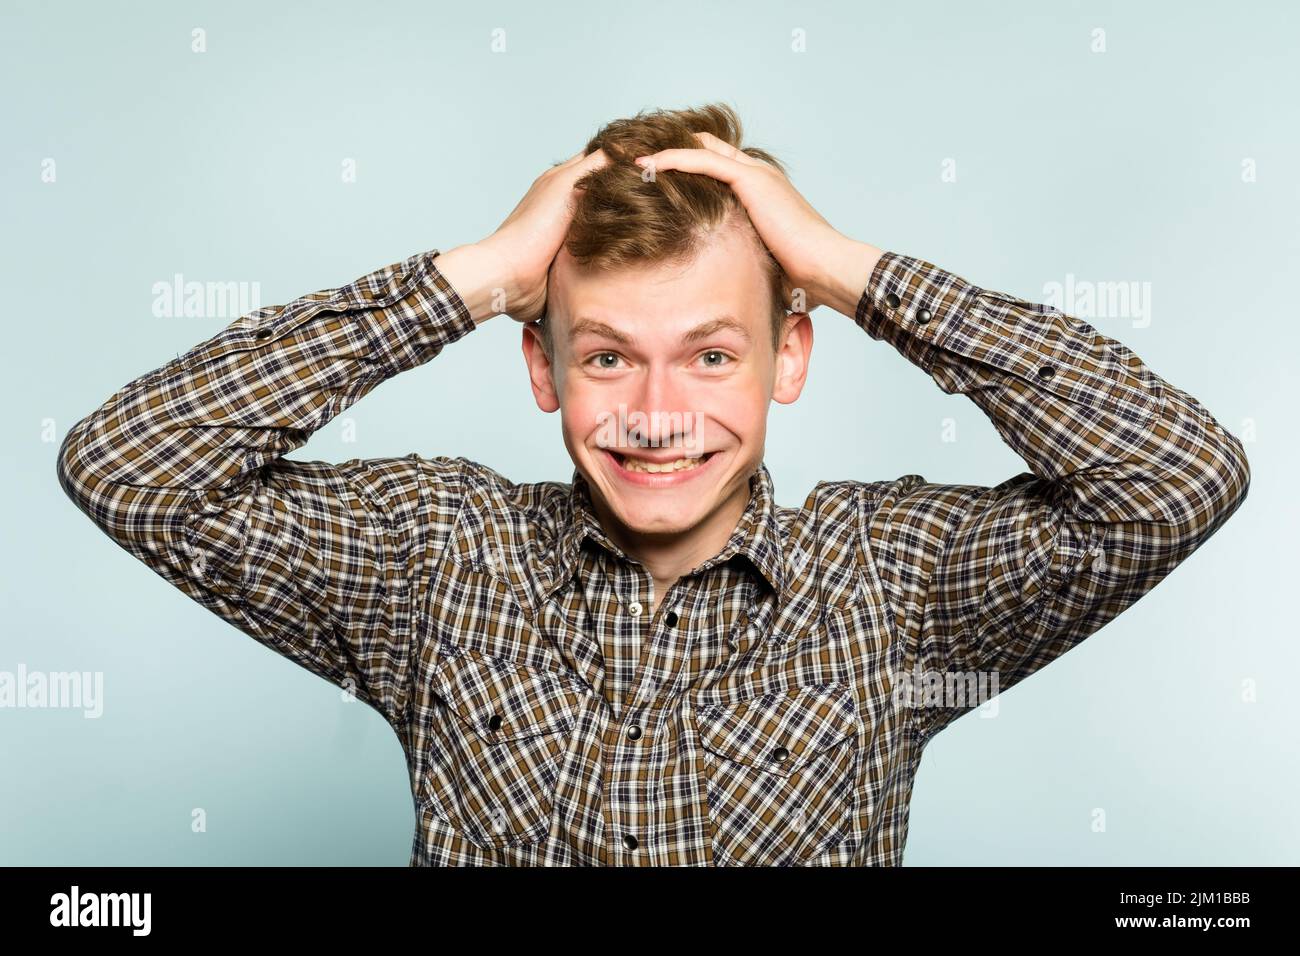 happy smile excited thrilled ecstatic man emotion Stock Photo